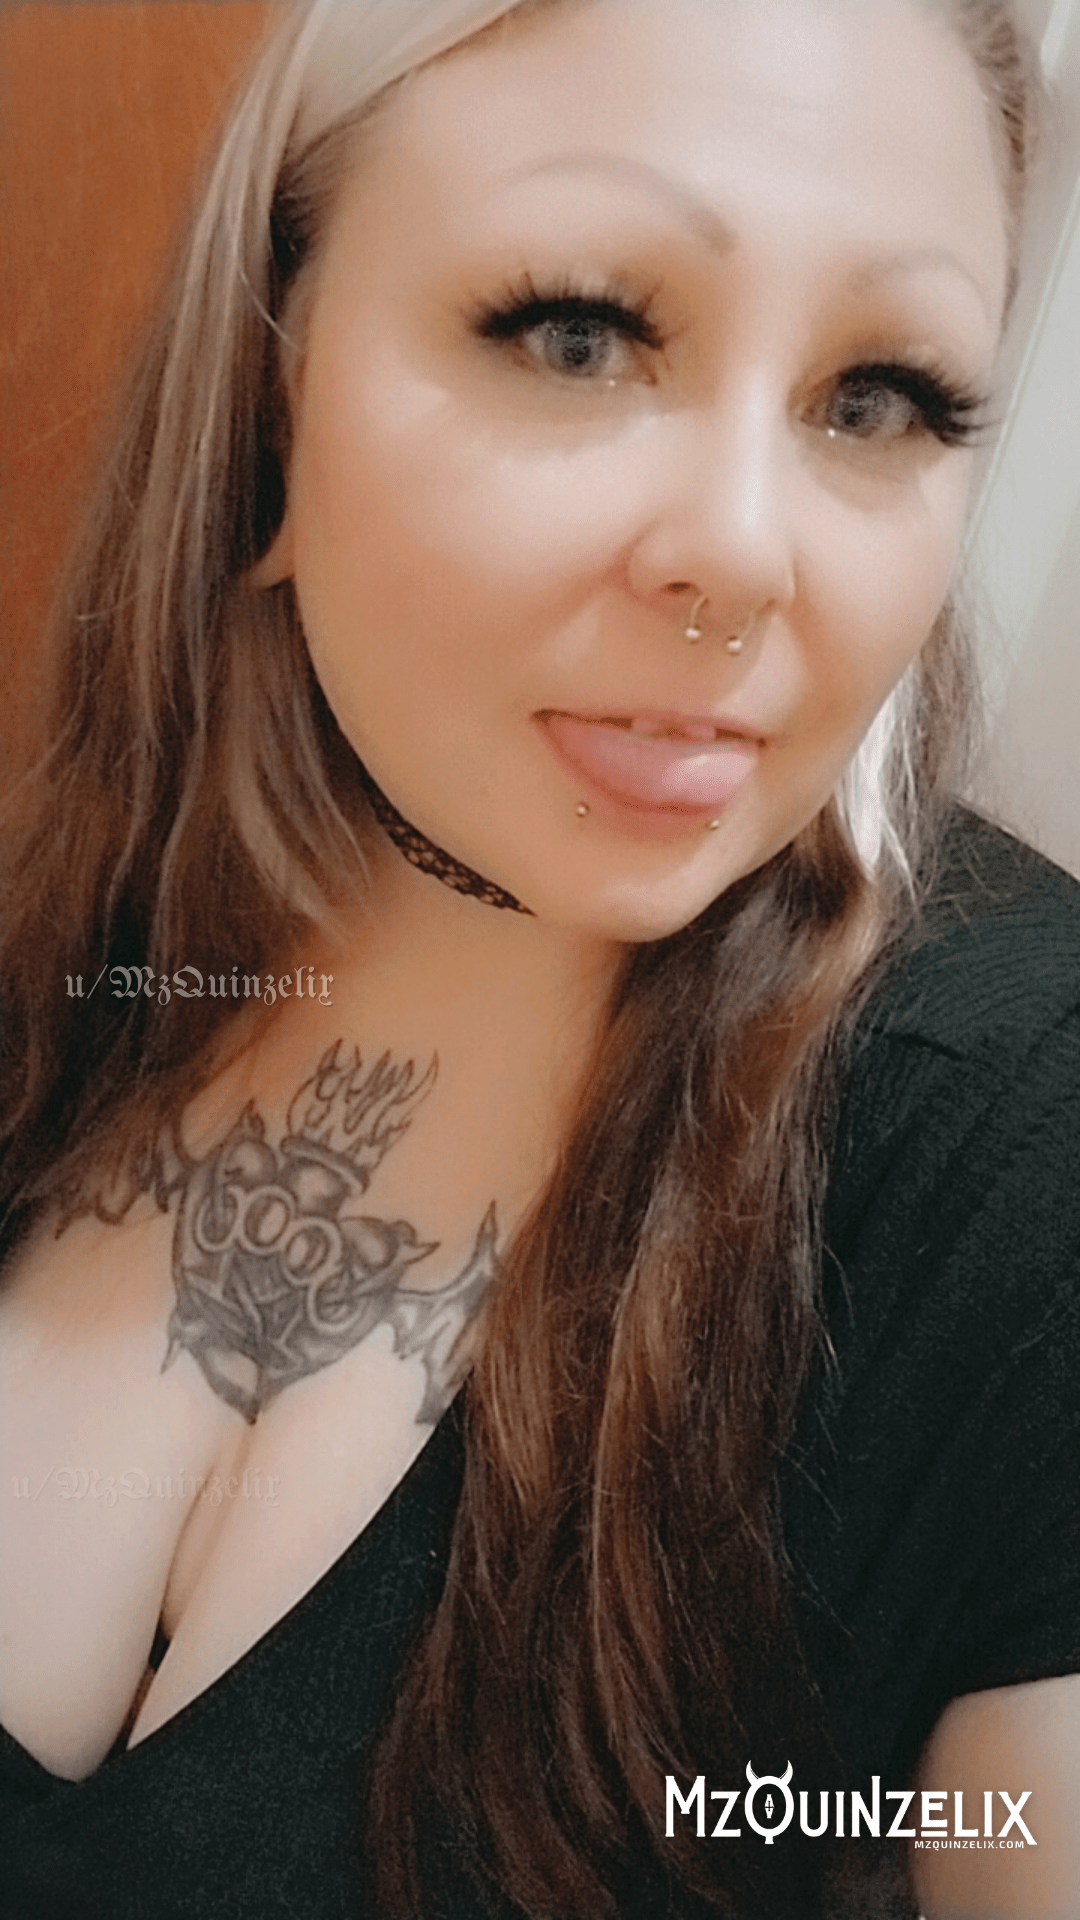 Watch the Photo by MzQuinzelix with the username @MzQuinzelix, who is a star user, posted on September 16, 2023 and the text says 'sorry that I've been a bit MIA...I had a date last Saturday...🙈🤭 #bbw #gothgirl #altgirl #milf #redhead #slut #bigtiddygoth #bigboobs #bigtits #tattoos #inkedgirls'